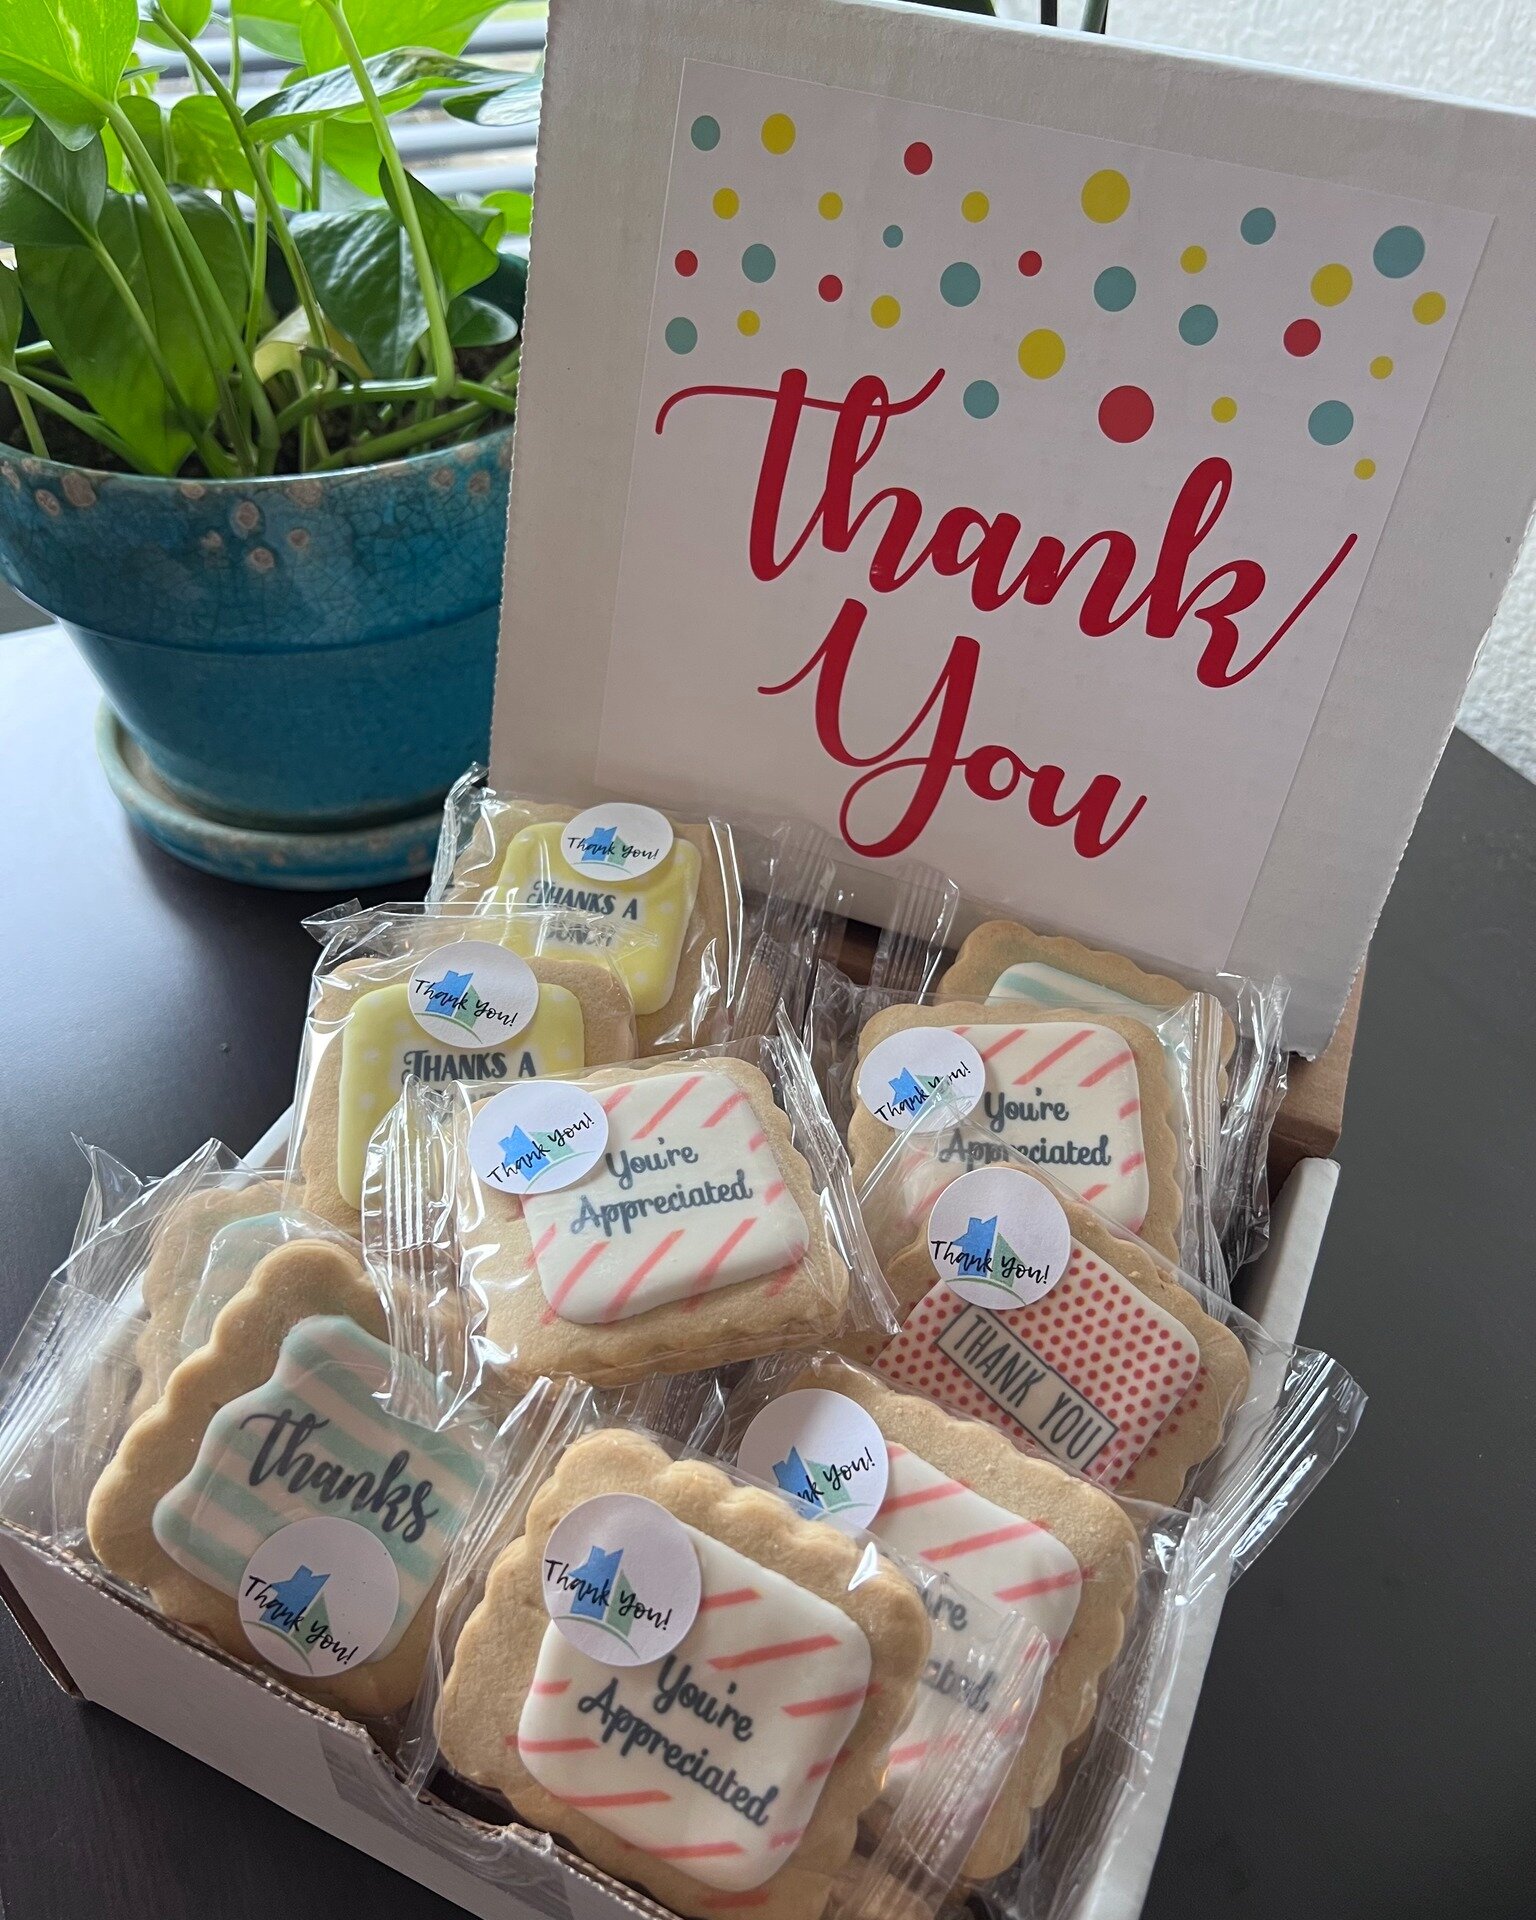 🌟 🌟 On March 1 we paused to celebrate Employee Appreciation Day! We celebrate the hard work that our team does each and every day to serve our communities, further our mission, and make a difference in the lives of each individual we serve. As an o